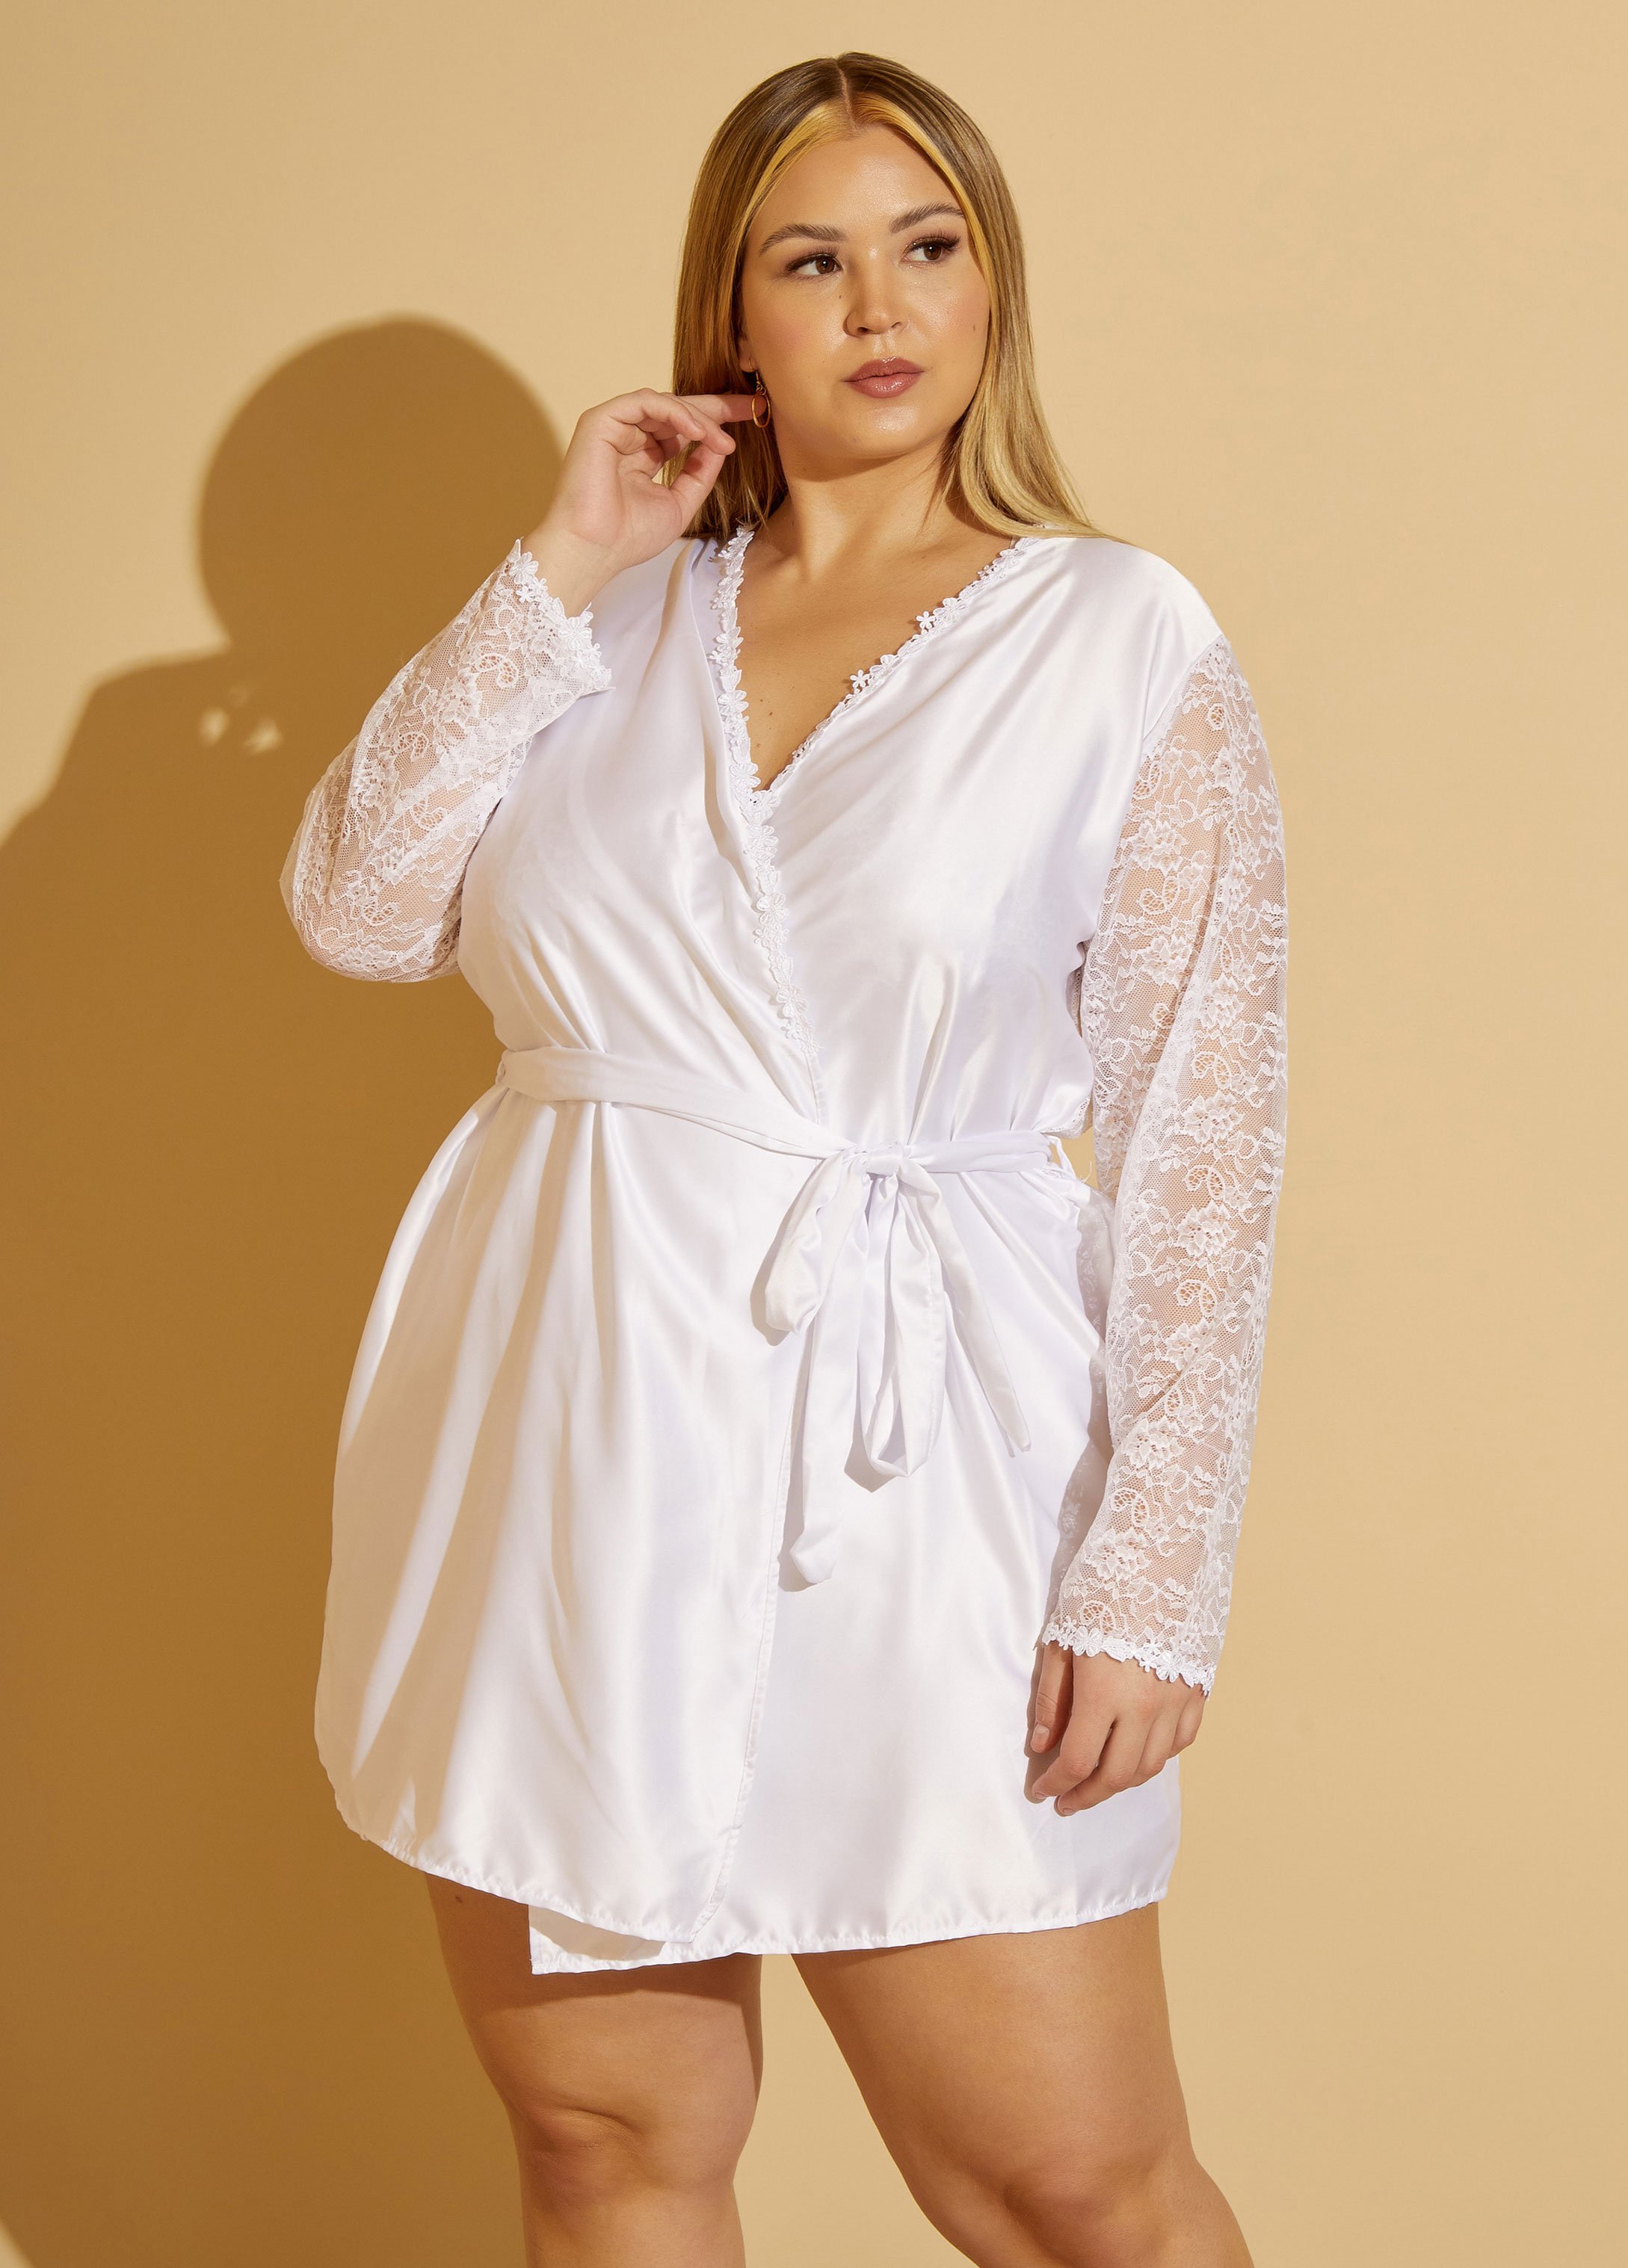 Sexy Satin Silk Lace Sexy Bathrobe For Women Plus Size S 5XL From